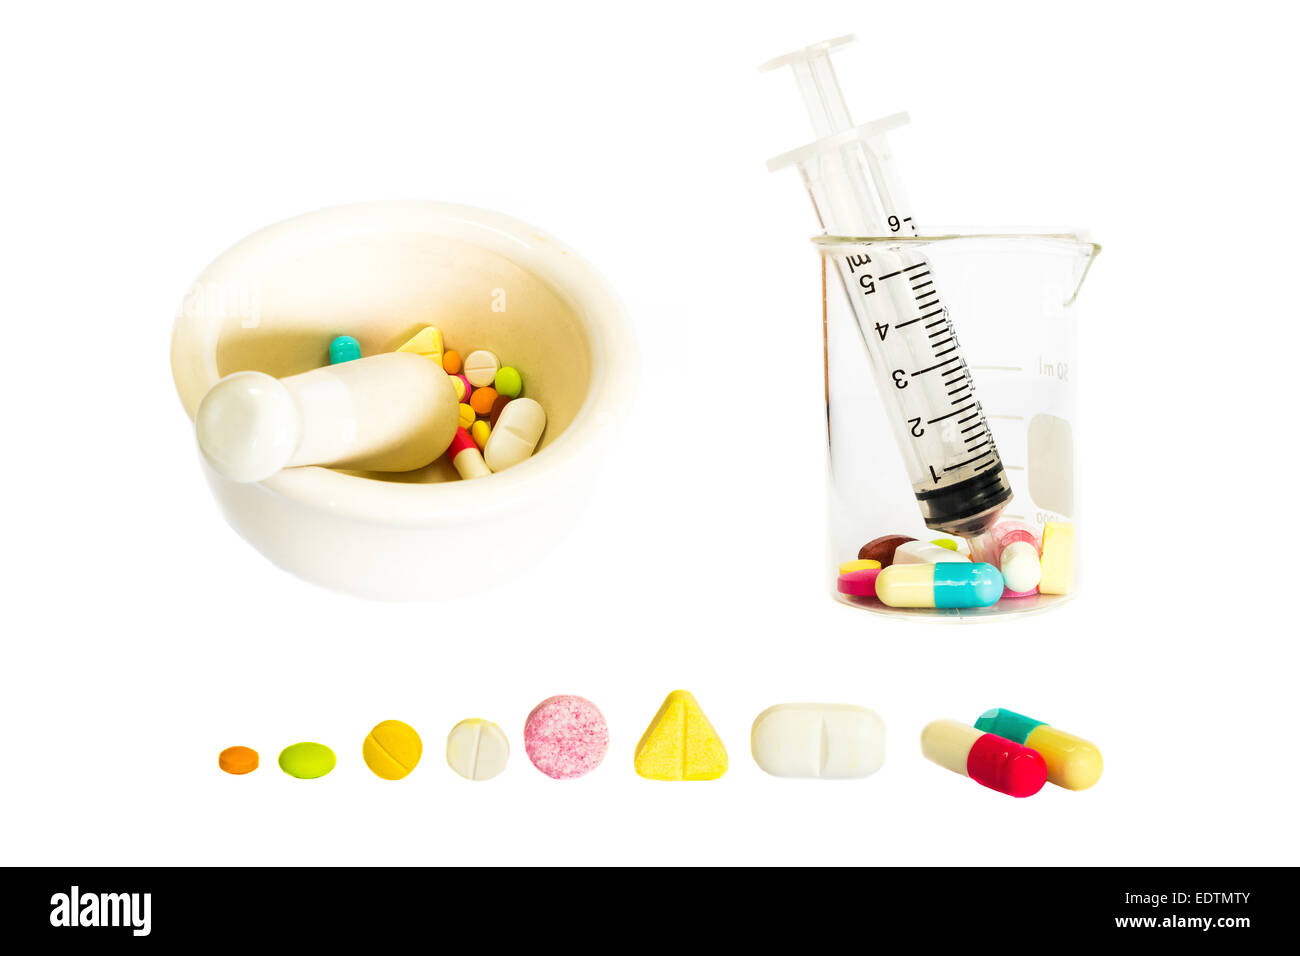 The collection of Medical is composed of syringe on beaker ,mortar and pestle,various shape of drugs Stock Photo